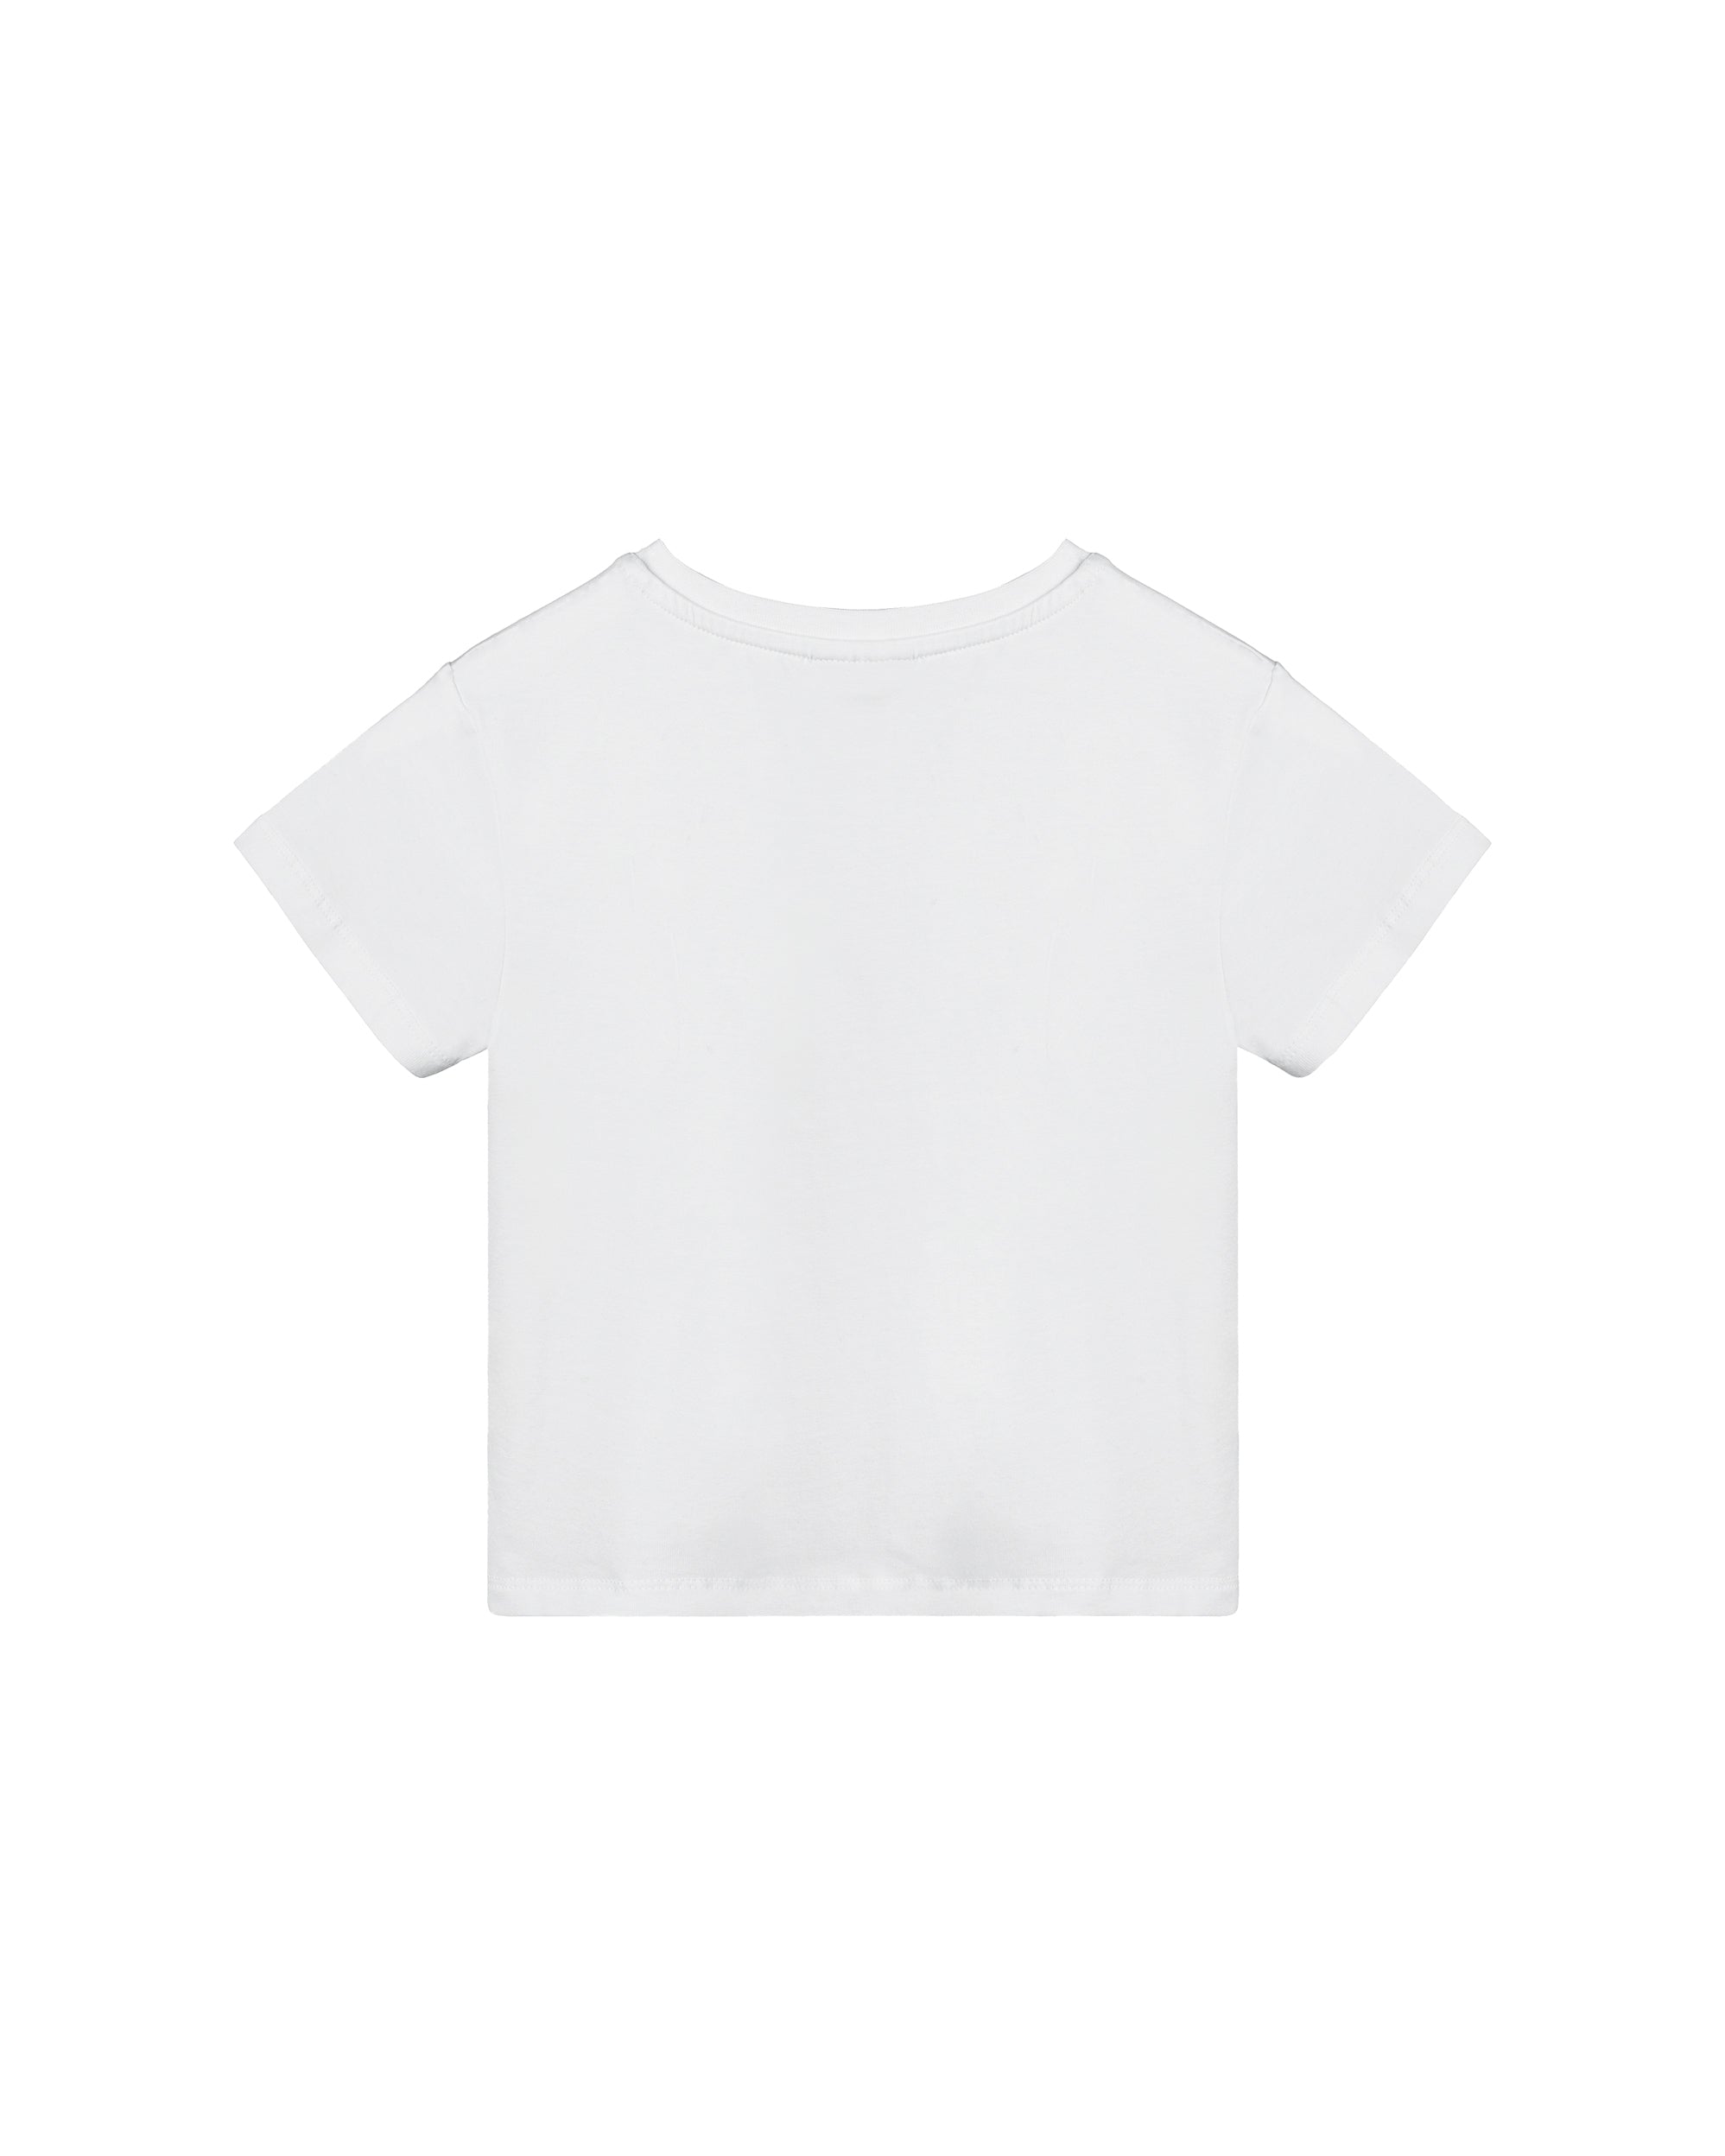 Syrup Visions Women Tee White (Green)